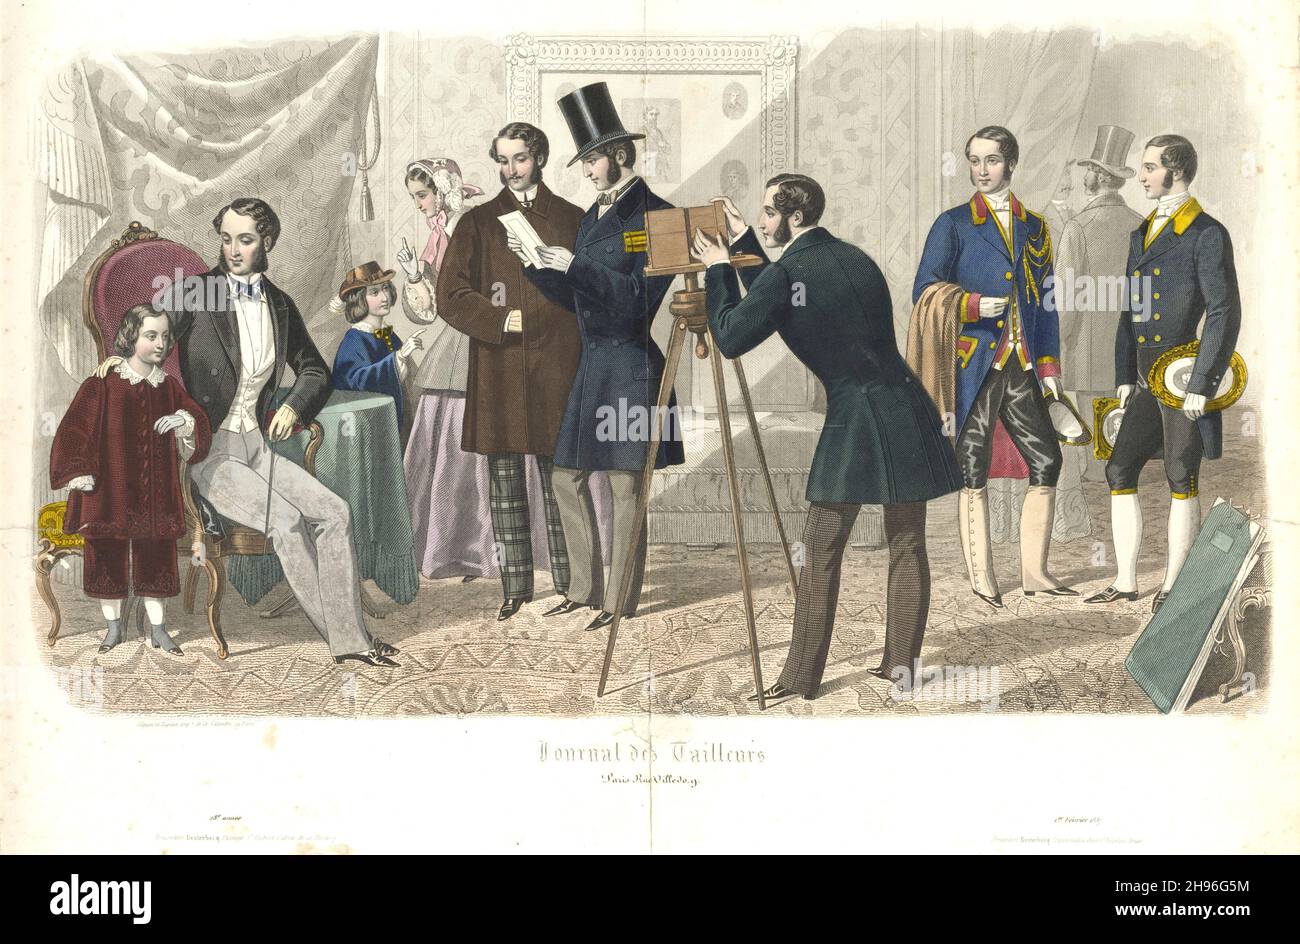 Fashion plate from French publication 'Journal des Tailleurs,' 1857. Stock Photo